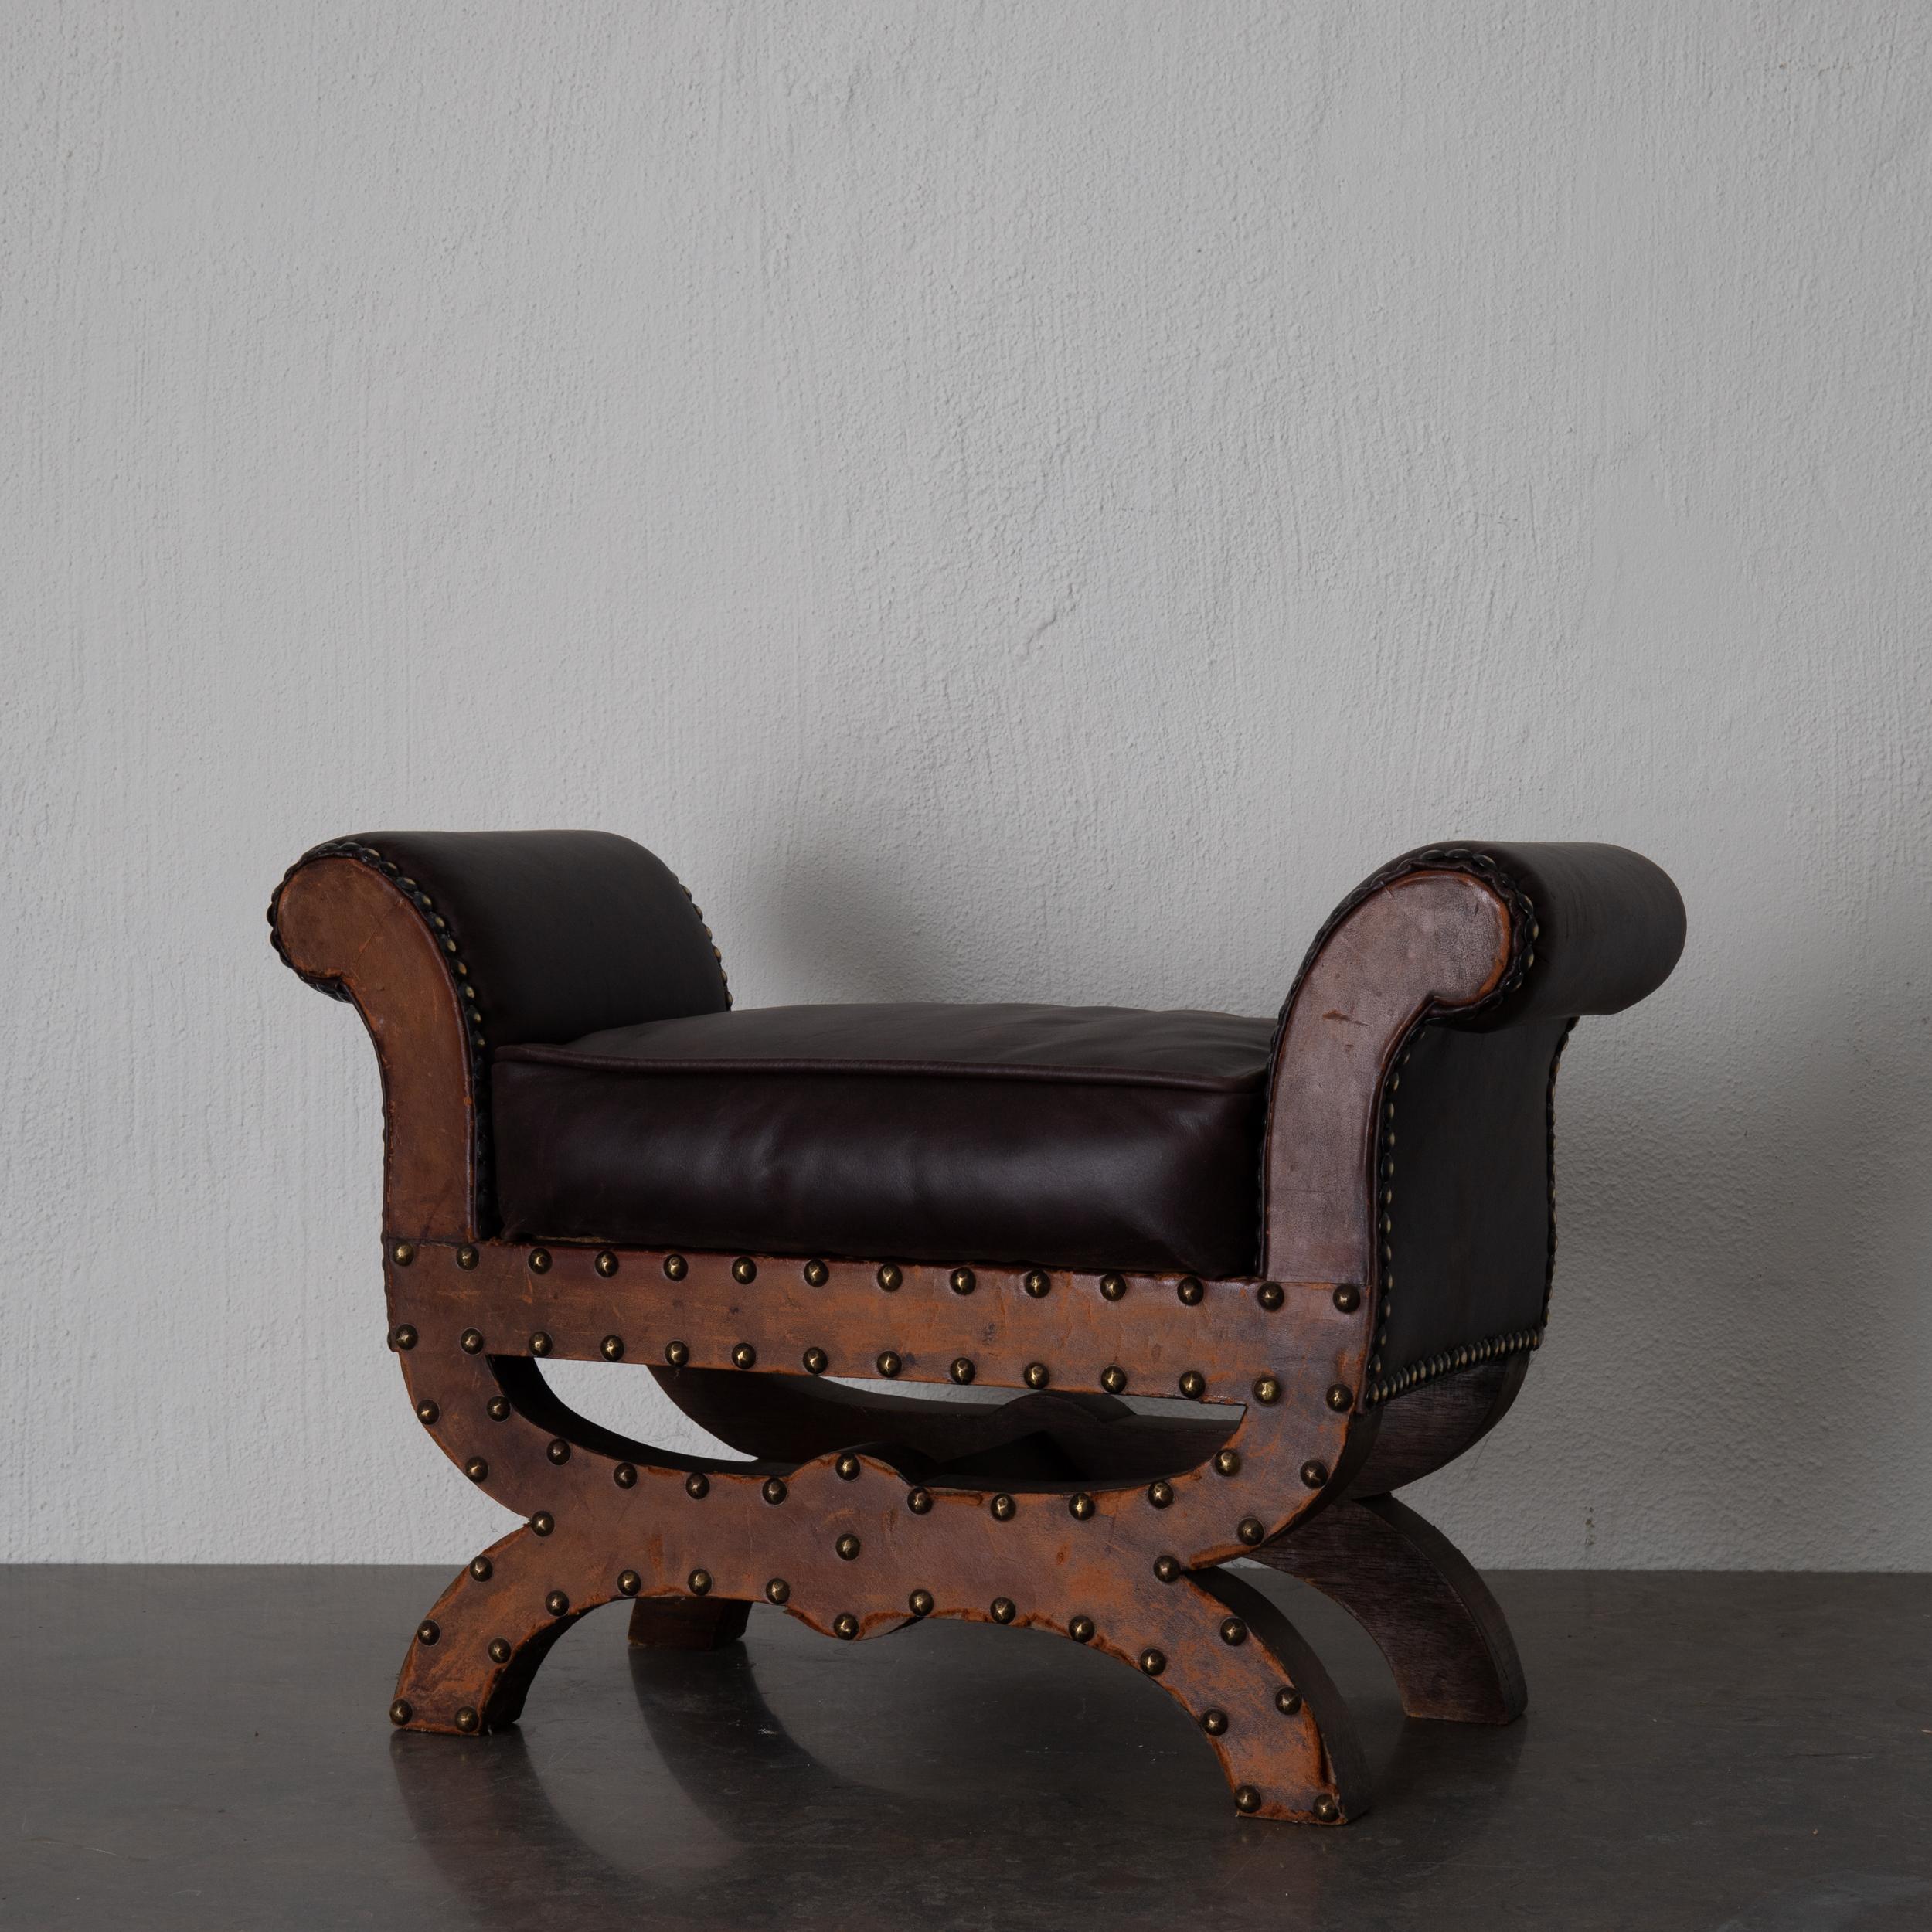 Stool small Otto Schultz Swedish leather Sweden. A stool smaller size made in Sweden during the early 20th century by furniture maker Otto Schultz. Upholstered in a dark brown leather with nail heads.